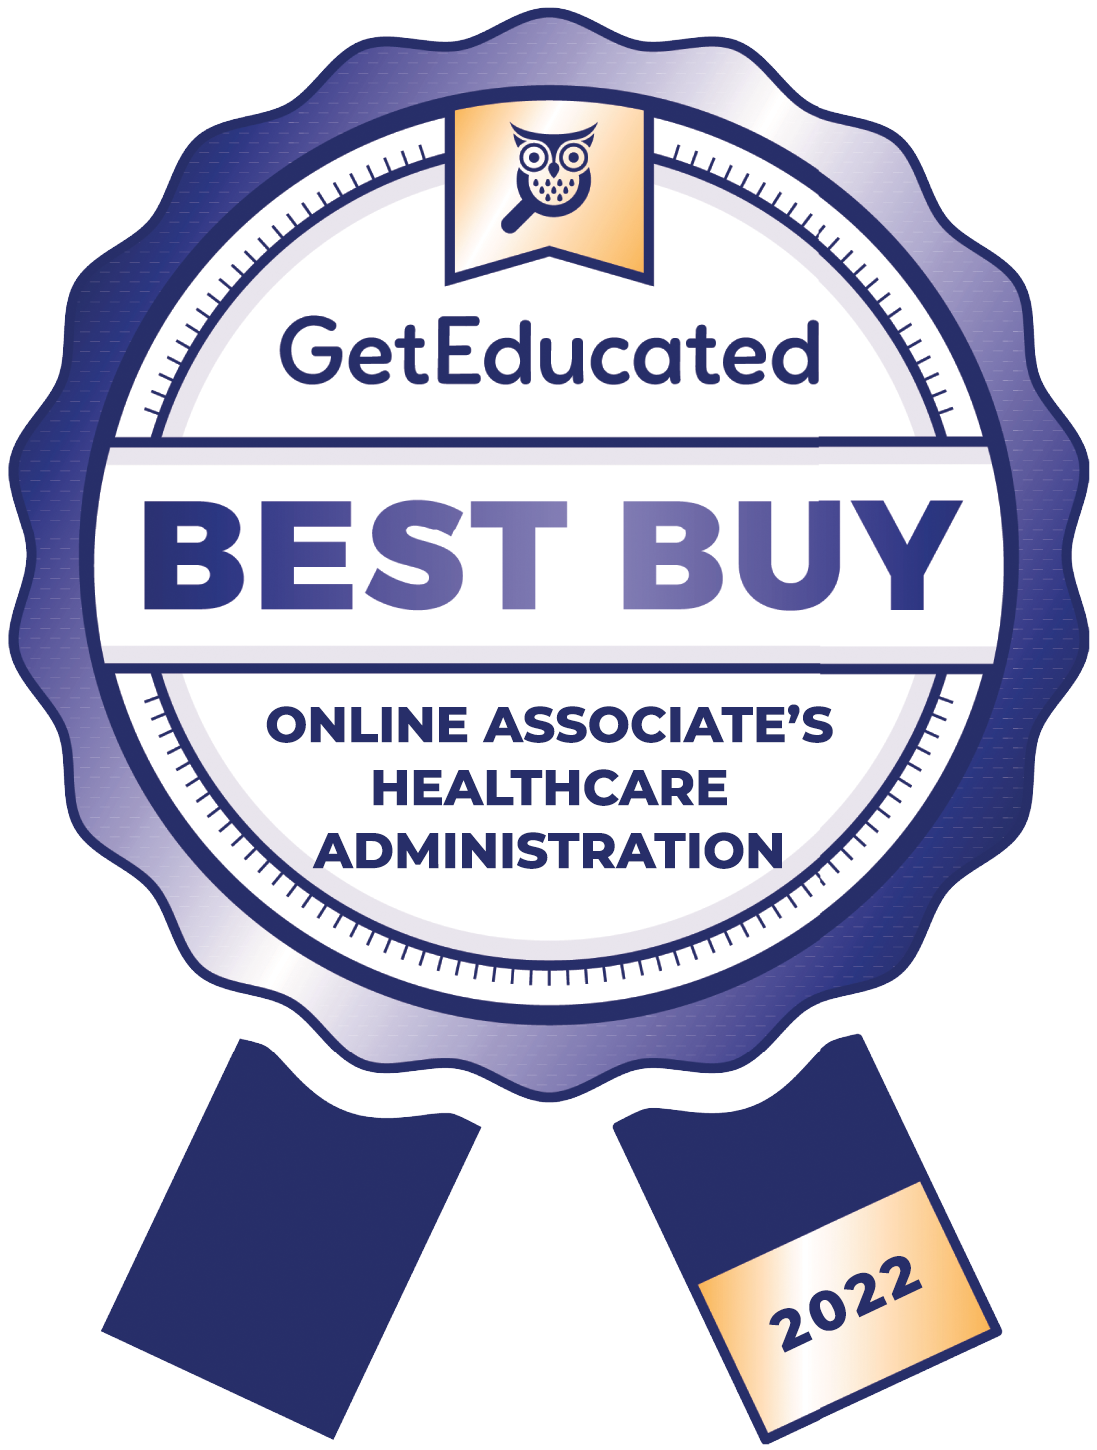 8 Most Affordable Associate's in Healthcare Admin Online